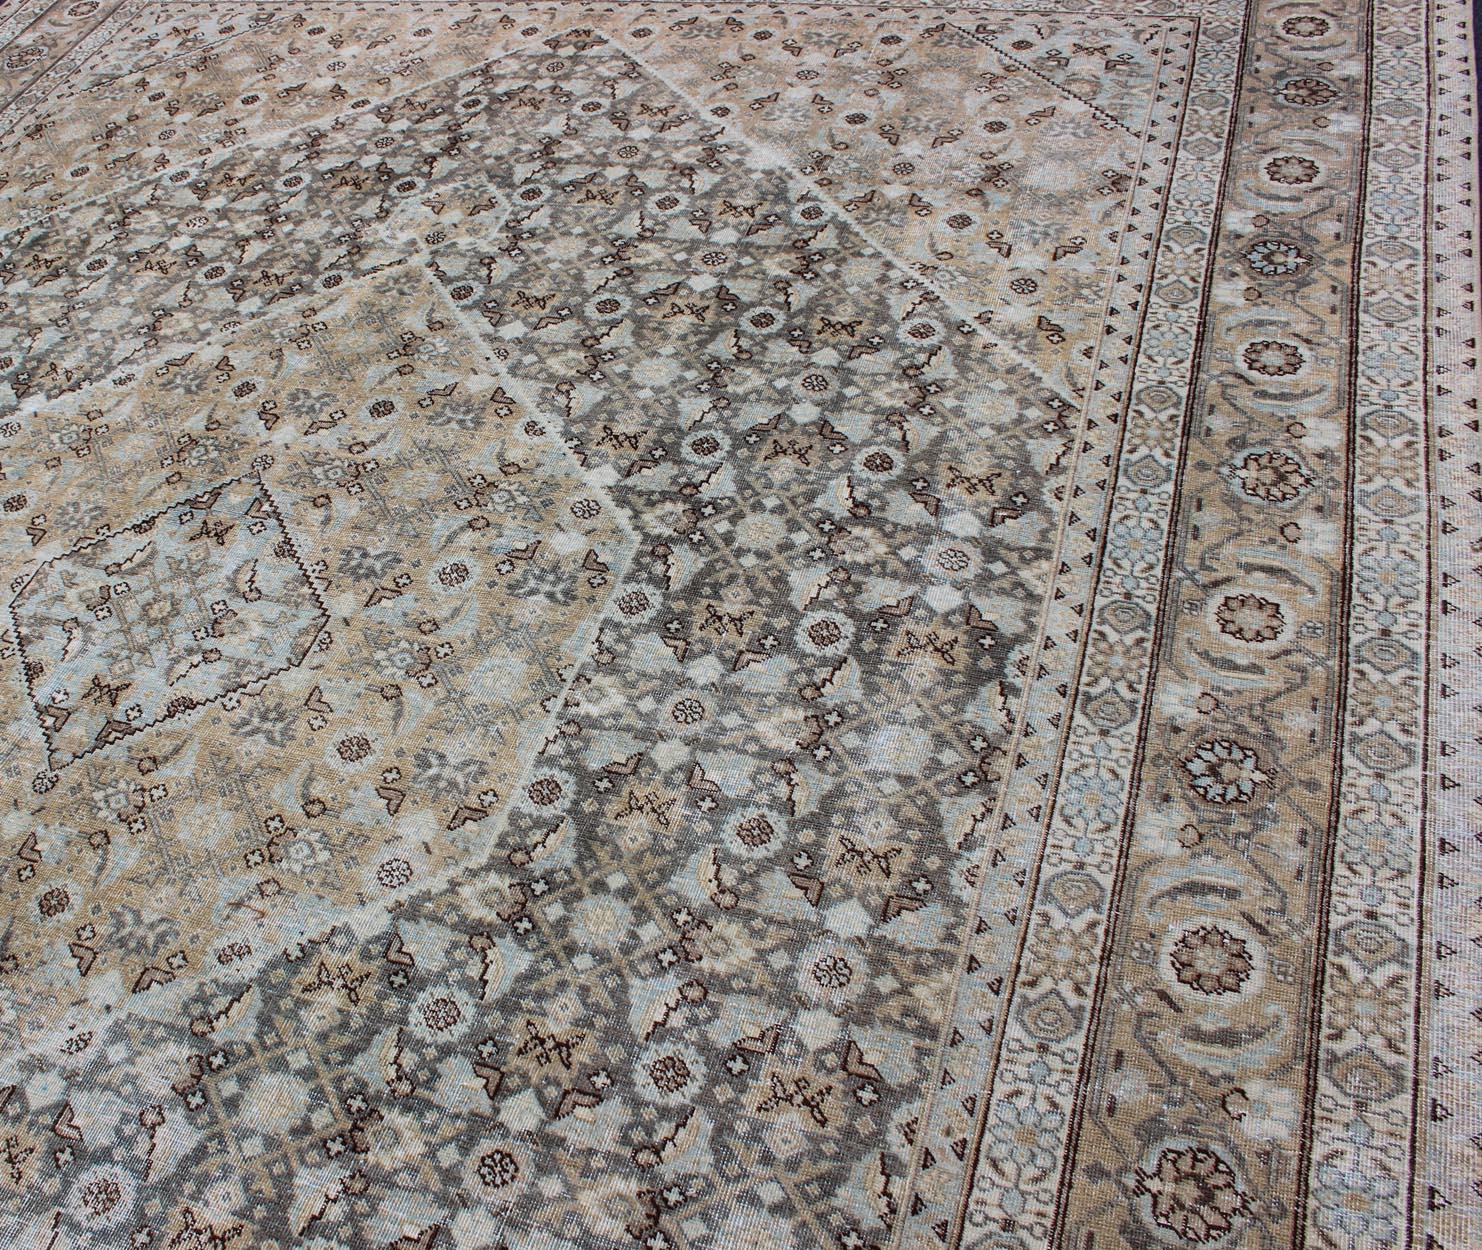 Early 20th Century Antique Persian Tabriz Carpet with Geometric Diamond Design in Earth Tones For Sale